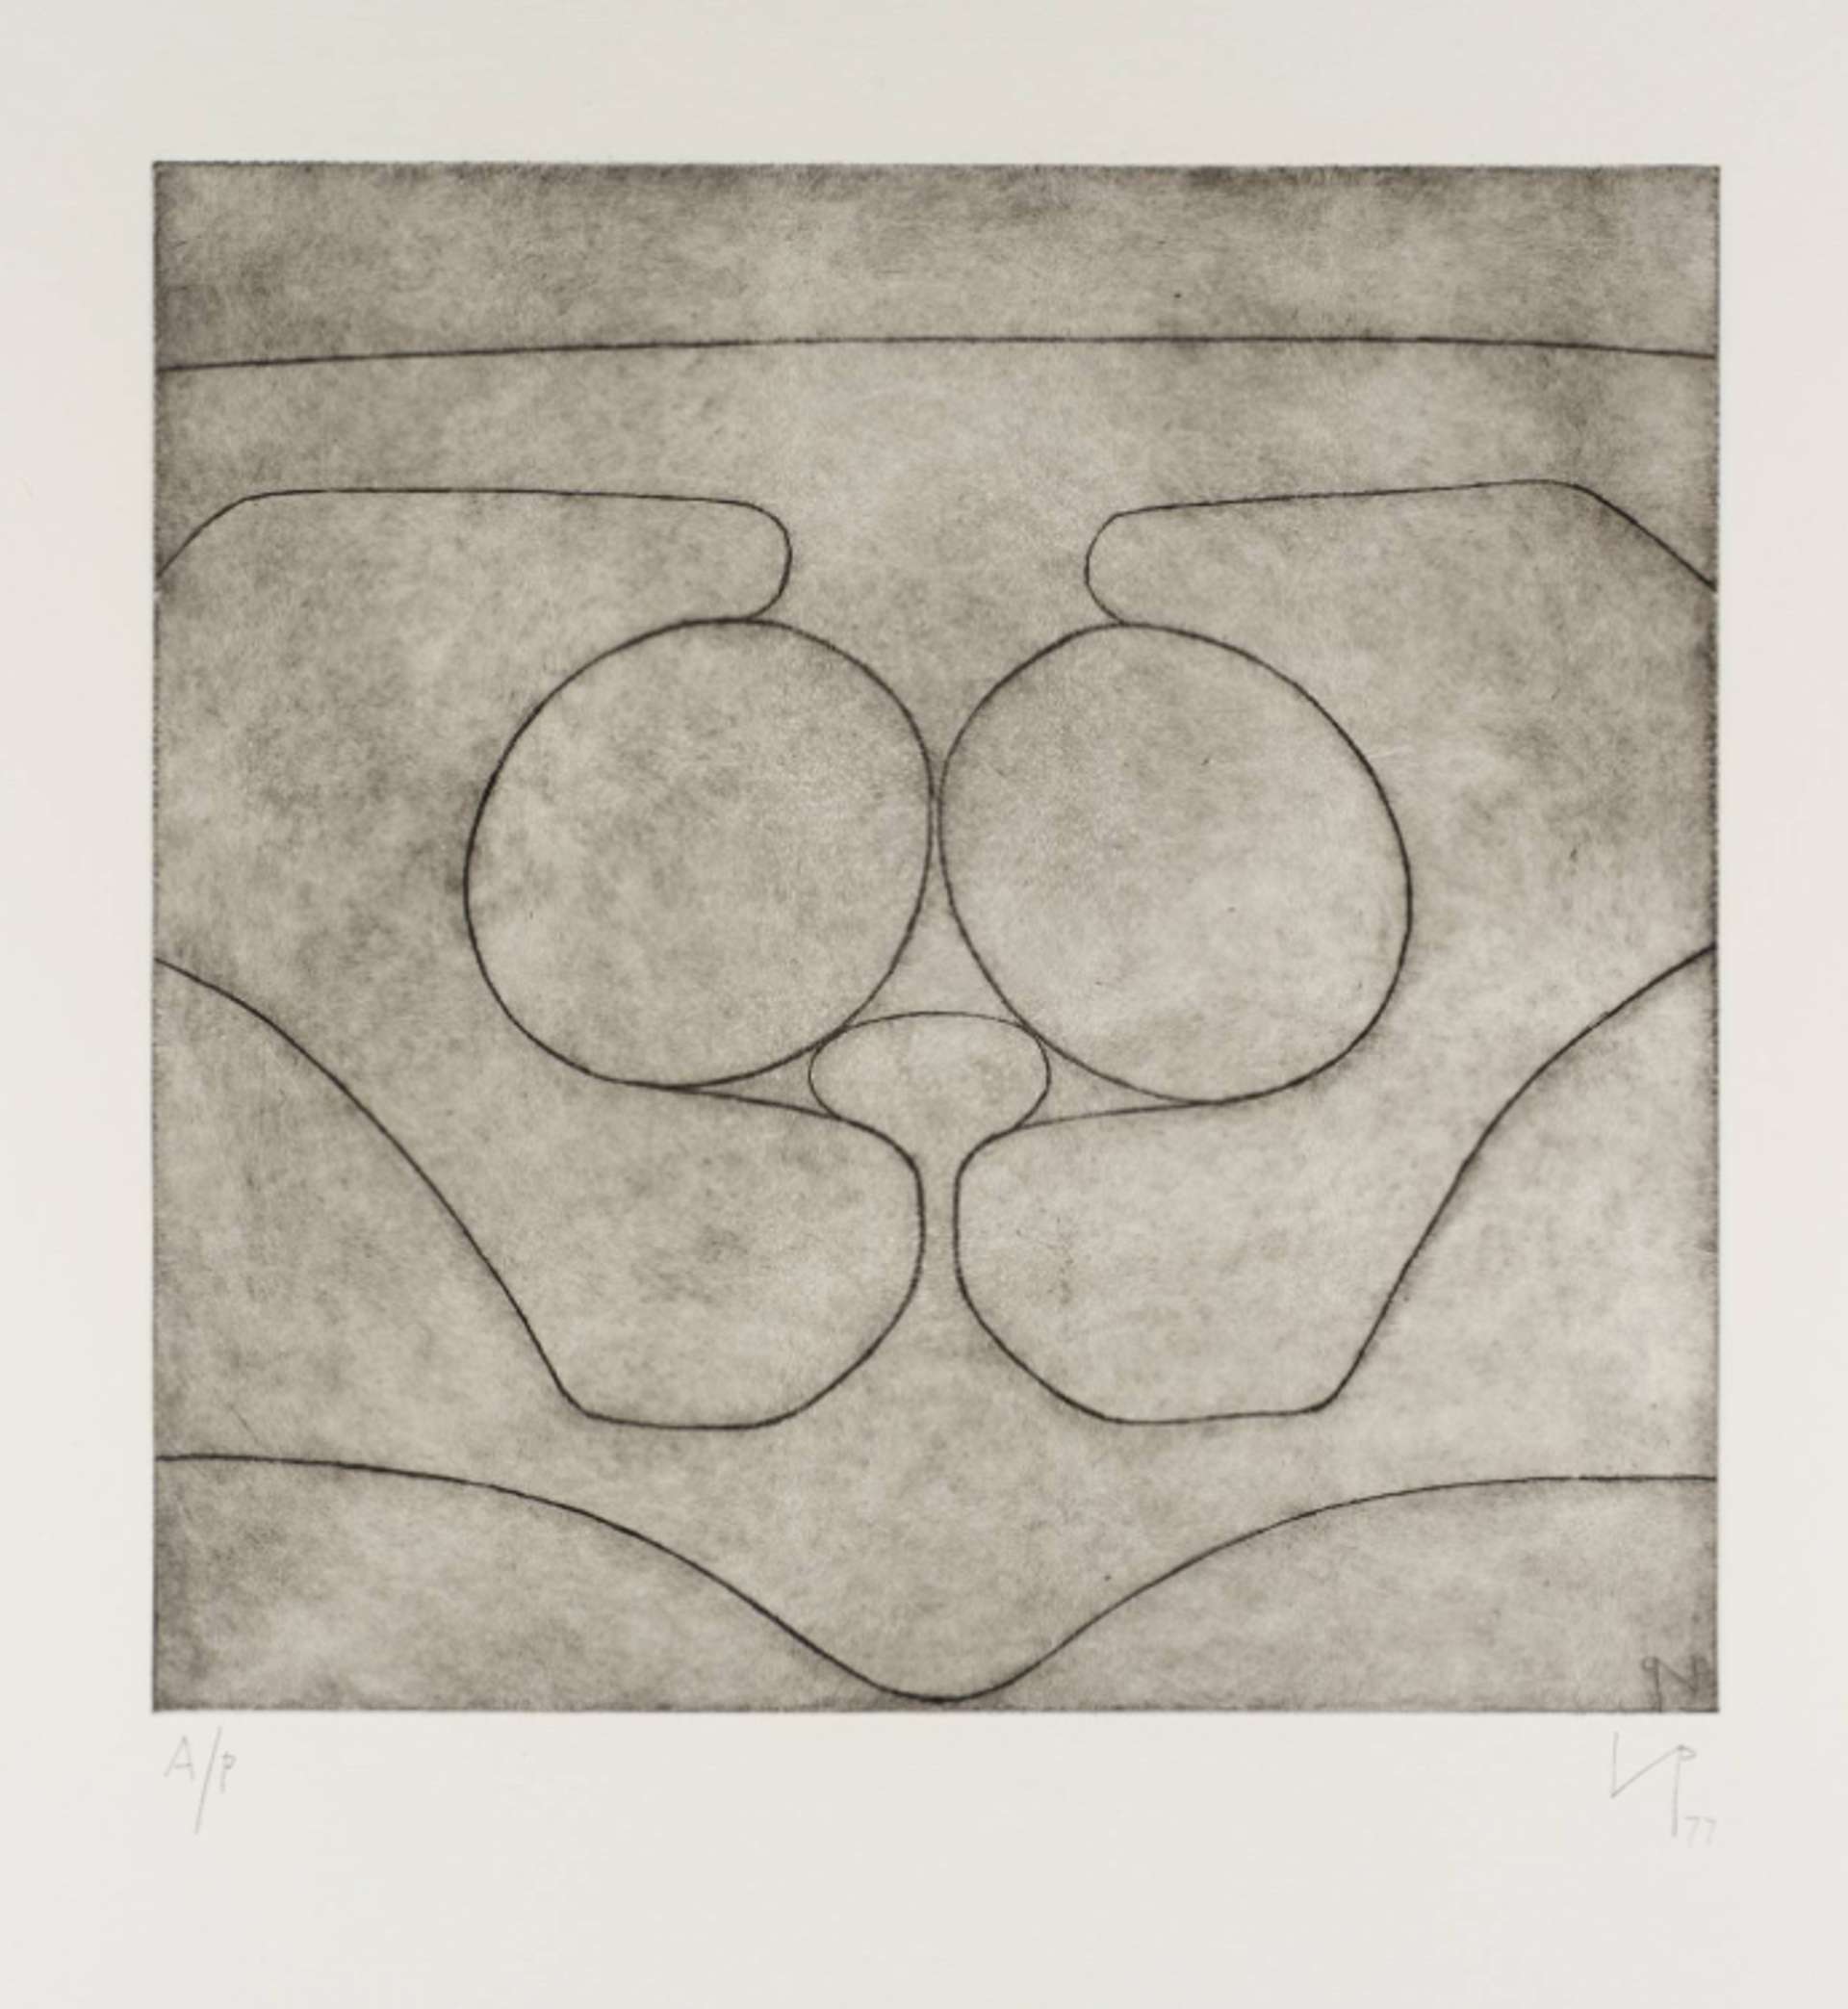 A mixed media painting titled "The Cave of Calypso II" by Victor Pasmore, featuring sharp, angular shapes in the foreground, and softer, organic shapes in muted shades in the background.